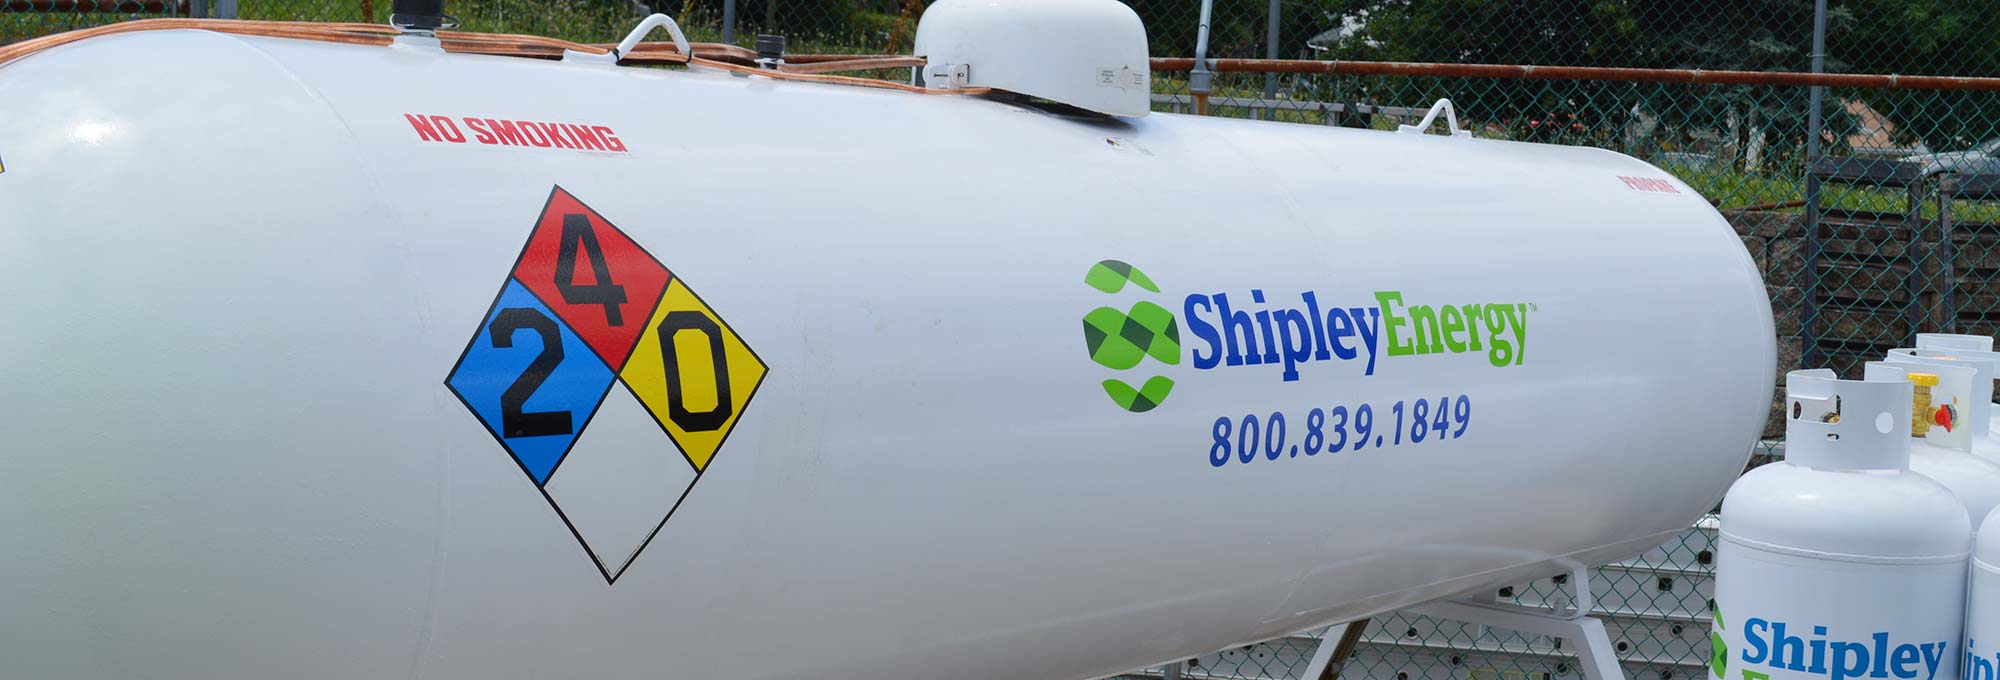 Commercial Propane in Phoenixville, PA